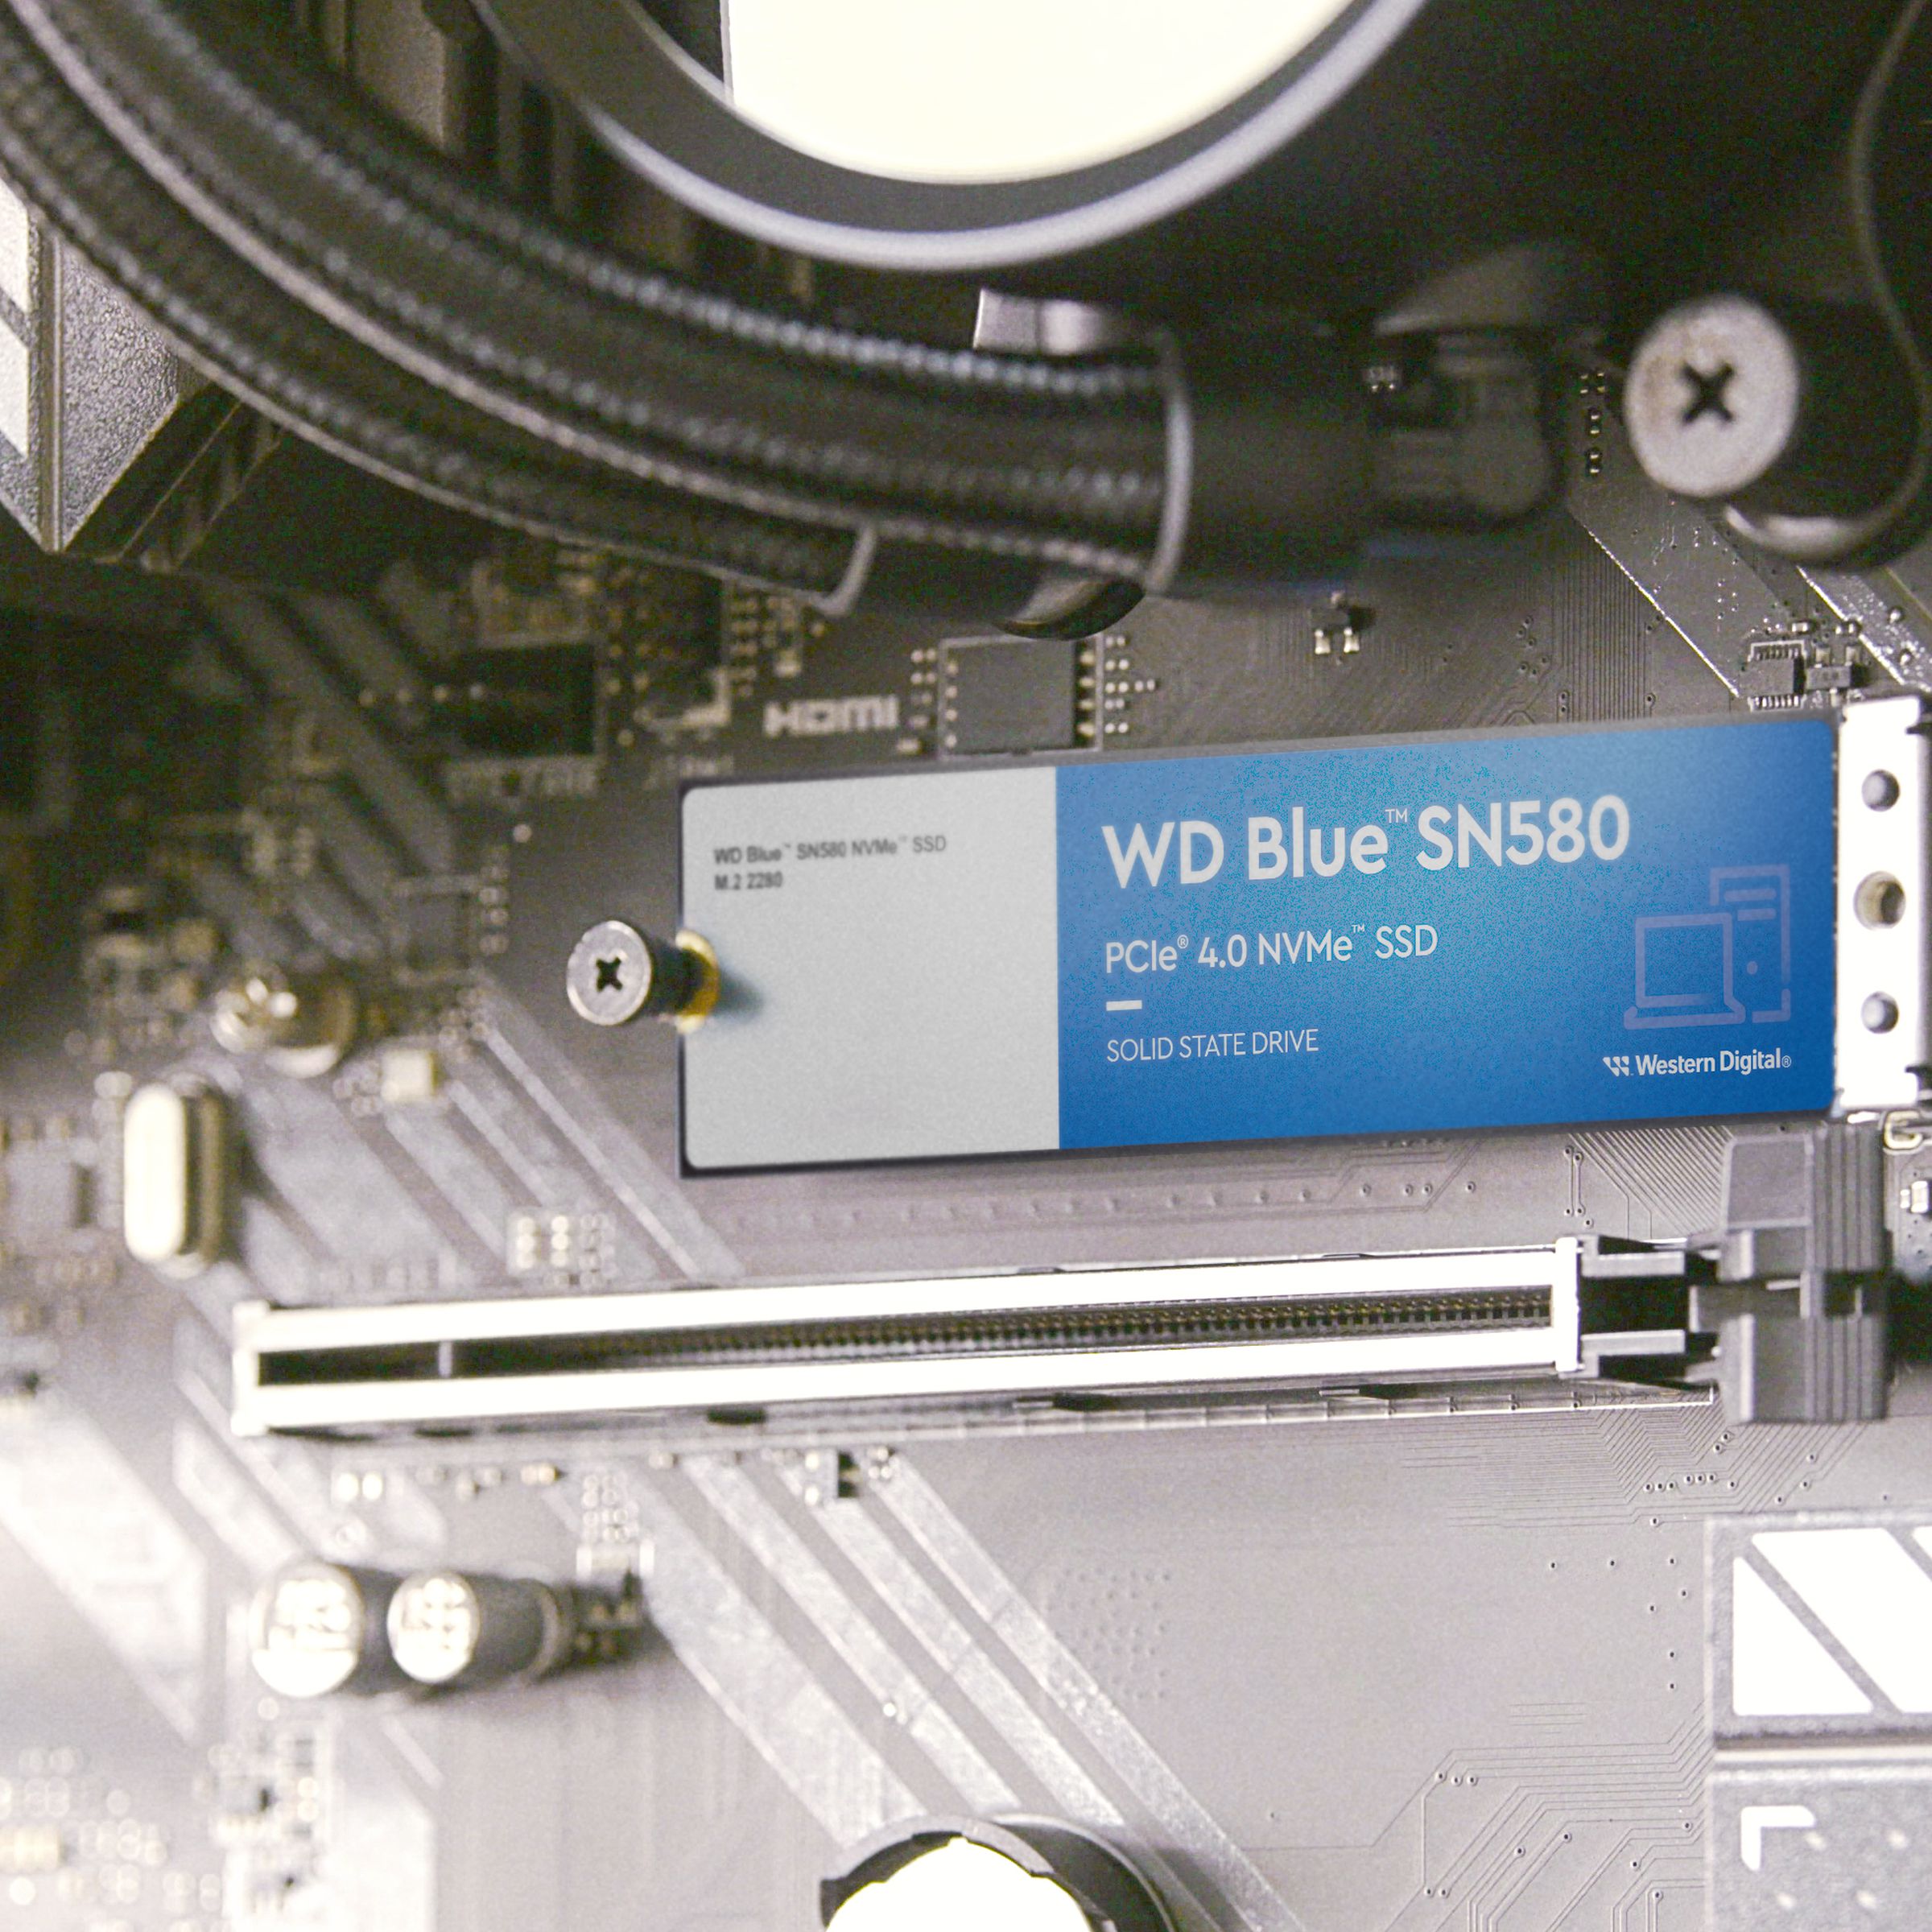 A photo showing a Western Digital SSD inside a computer